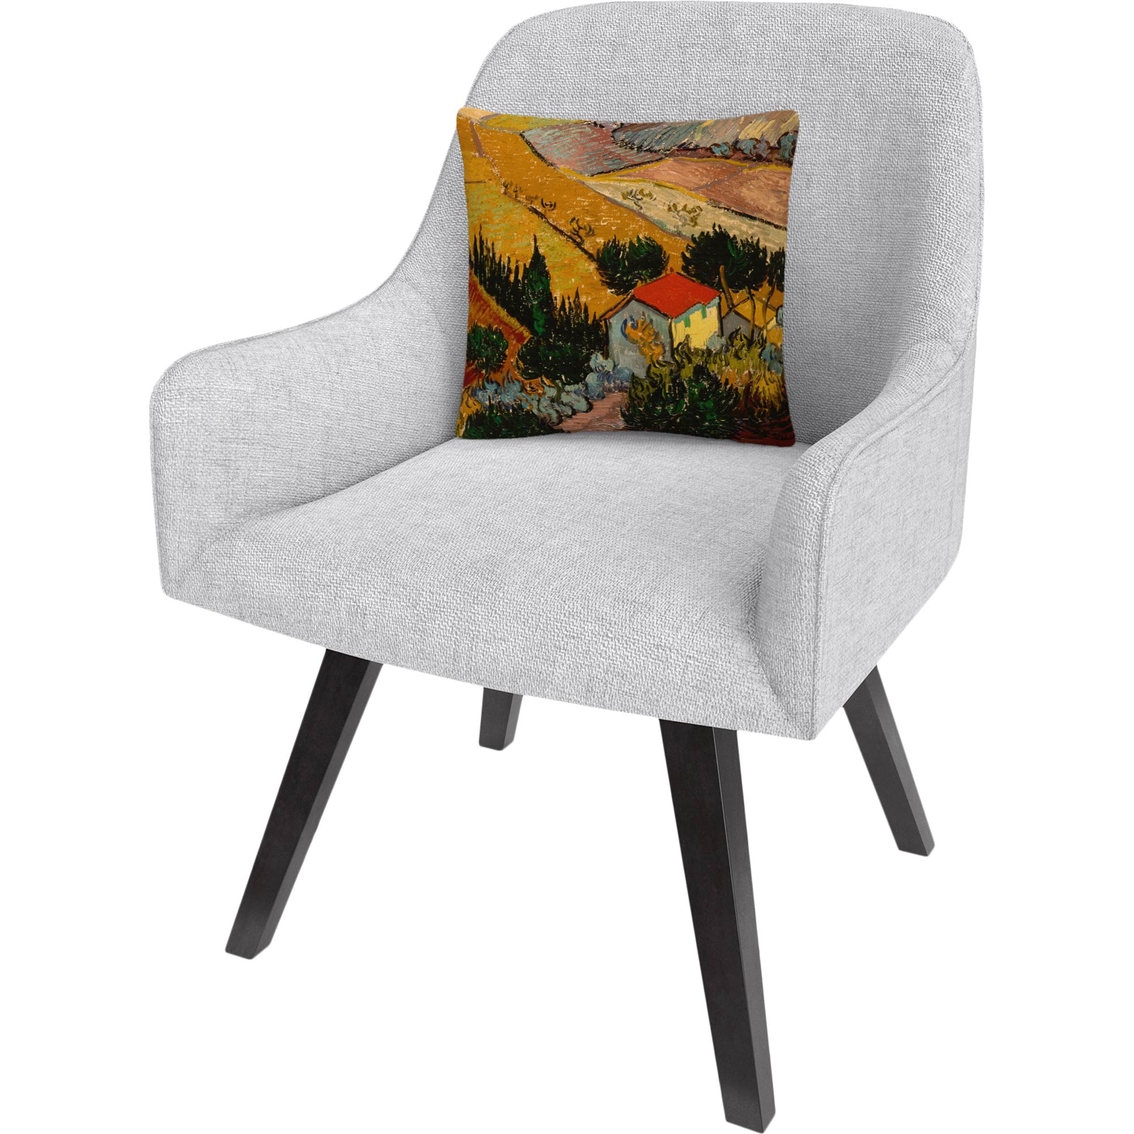 Trademark Fine Art Vincent van Gogh Landscape with House Decorative Throw Pillow - Image 2 of 3